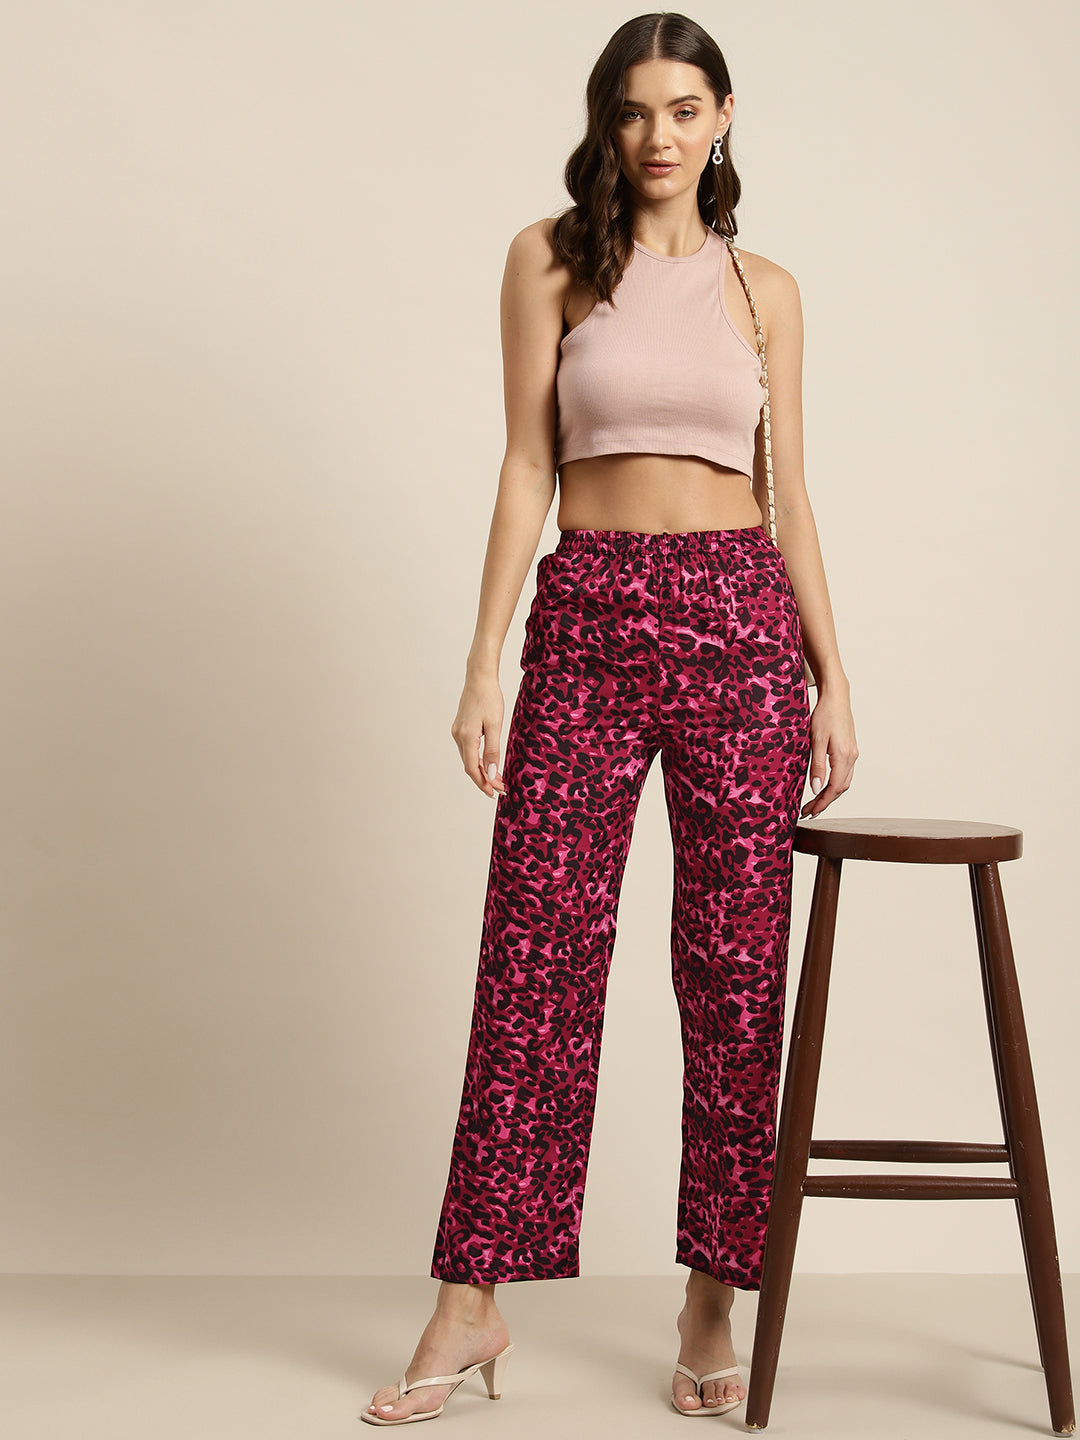 Wine and black leopard print trousers